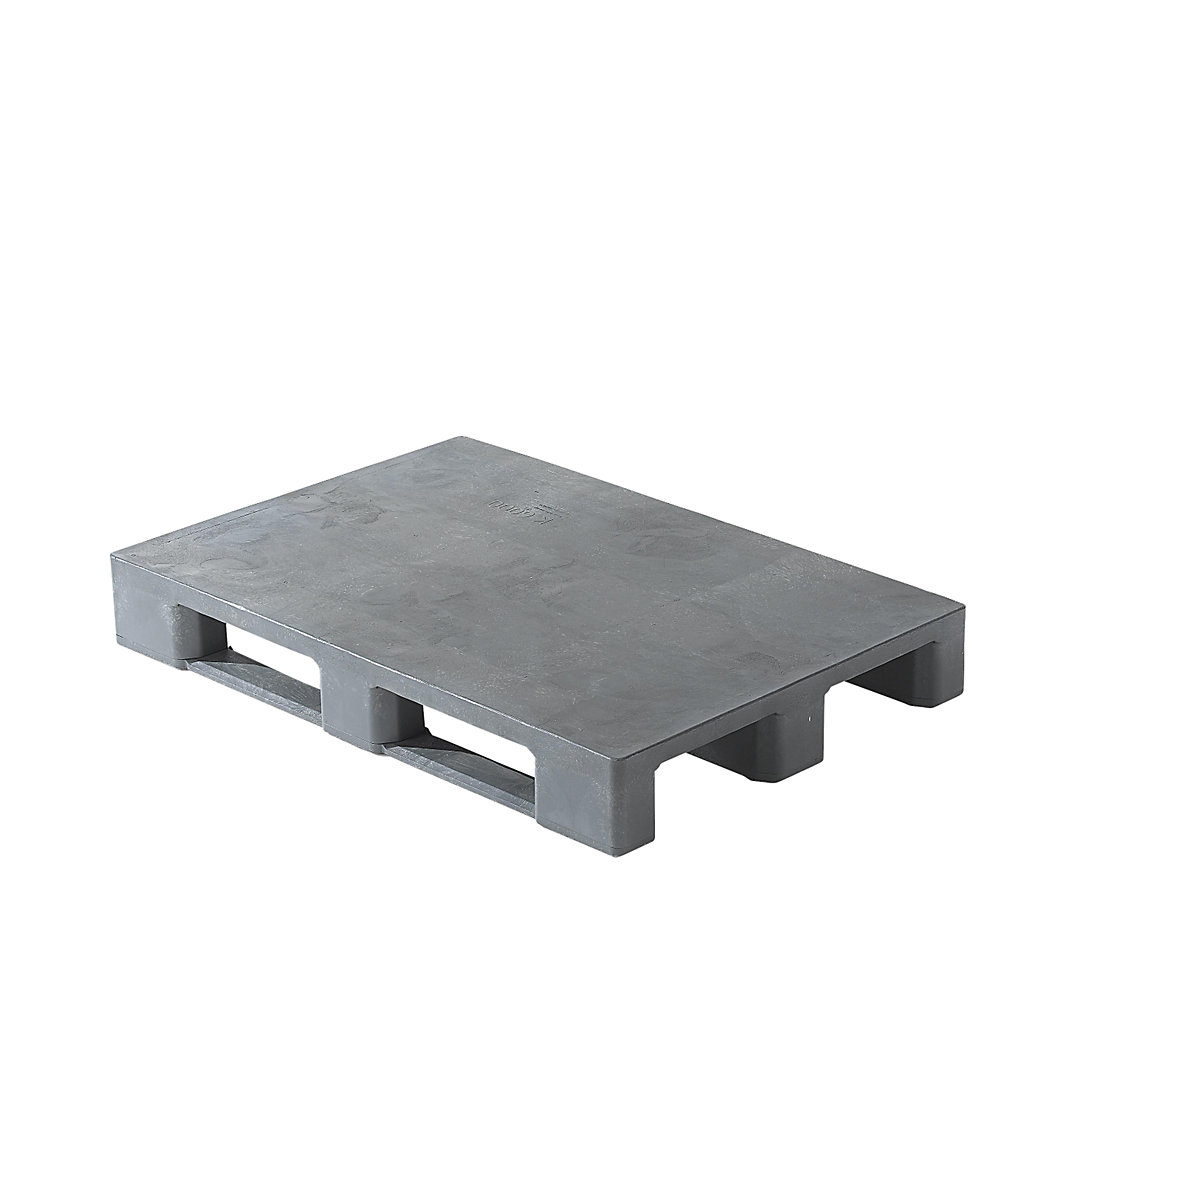 Plastic EURO pallet, with raised edges, closed top deck, grey-6